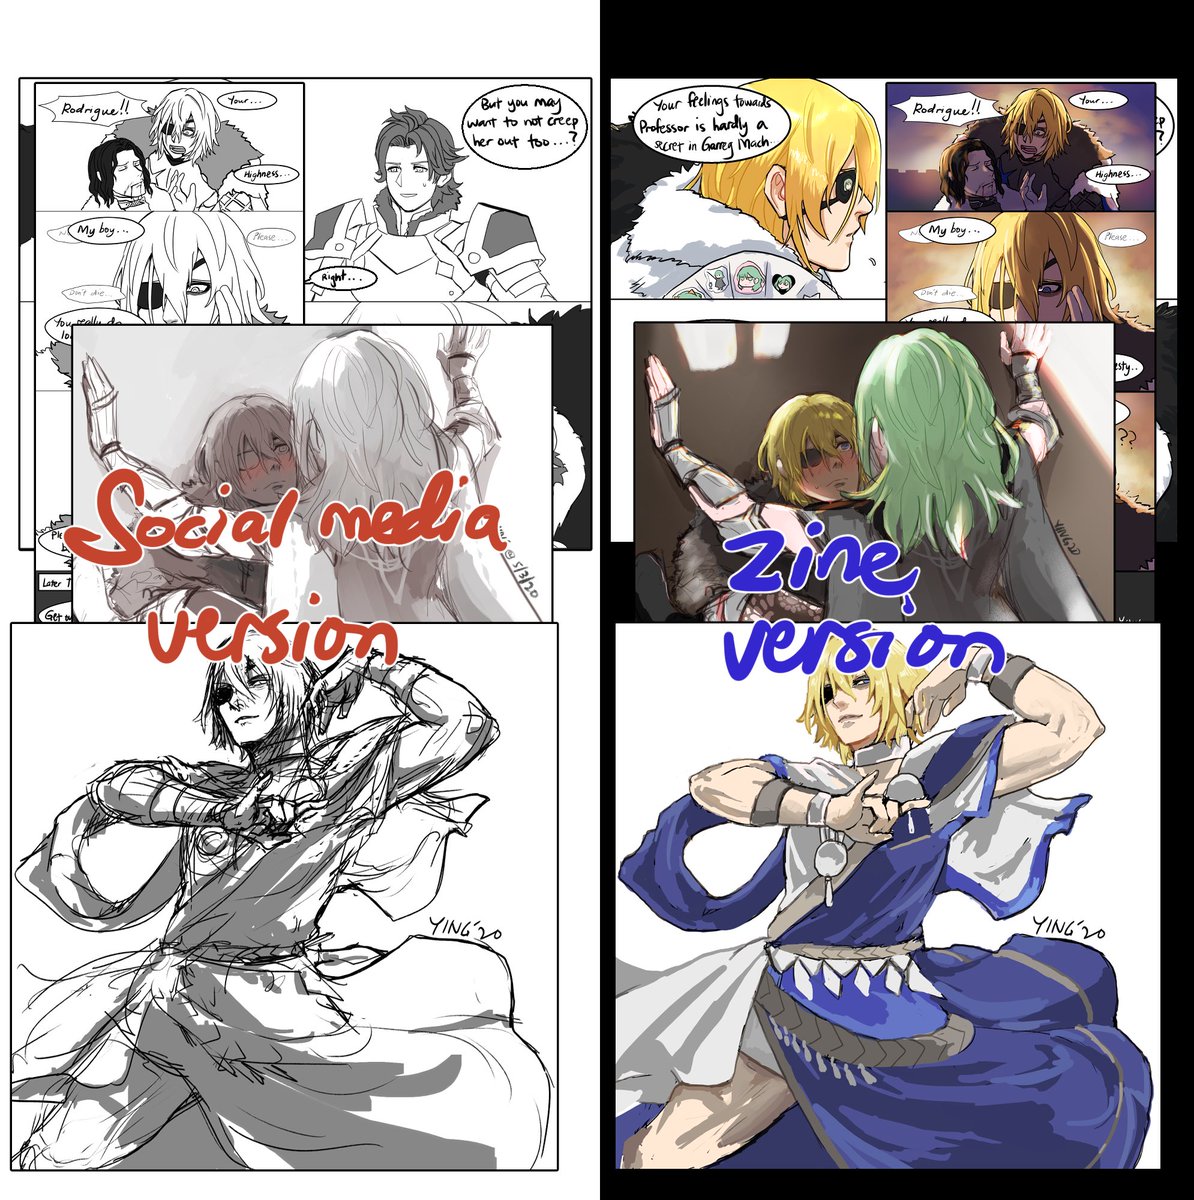 [RT appreciated!] I've (finally) compiled most of my #FE3H fanart from mid Oct'19 to Oct'20 into a 80++ pages pdf:
https://t.co/TET15vjBHy
Price: $12 (or Pay What You Want)
Format: PDF

Previous Digital Zine(Jul~Oct'19):
https://t.co/tRVV95zO6v

#FireEmblemThreeHouses 